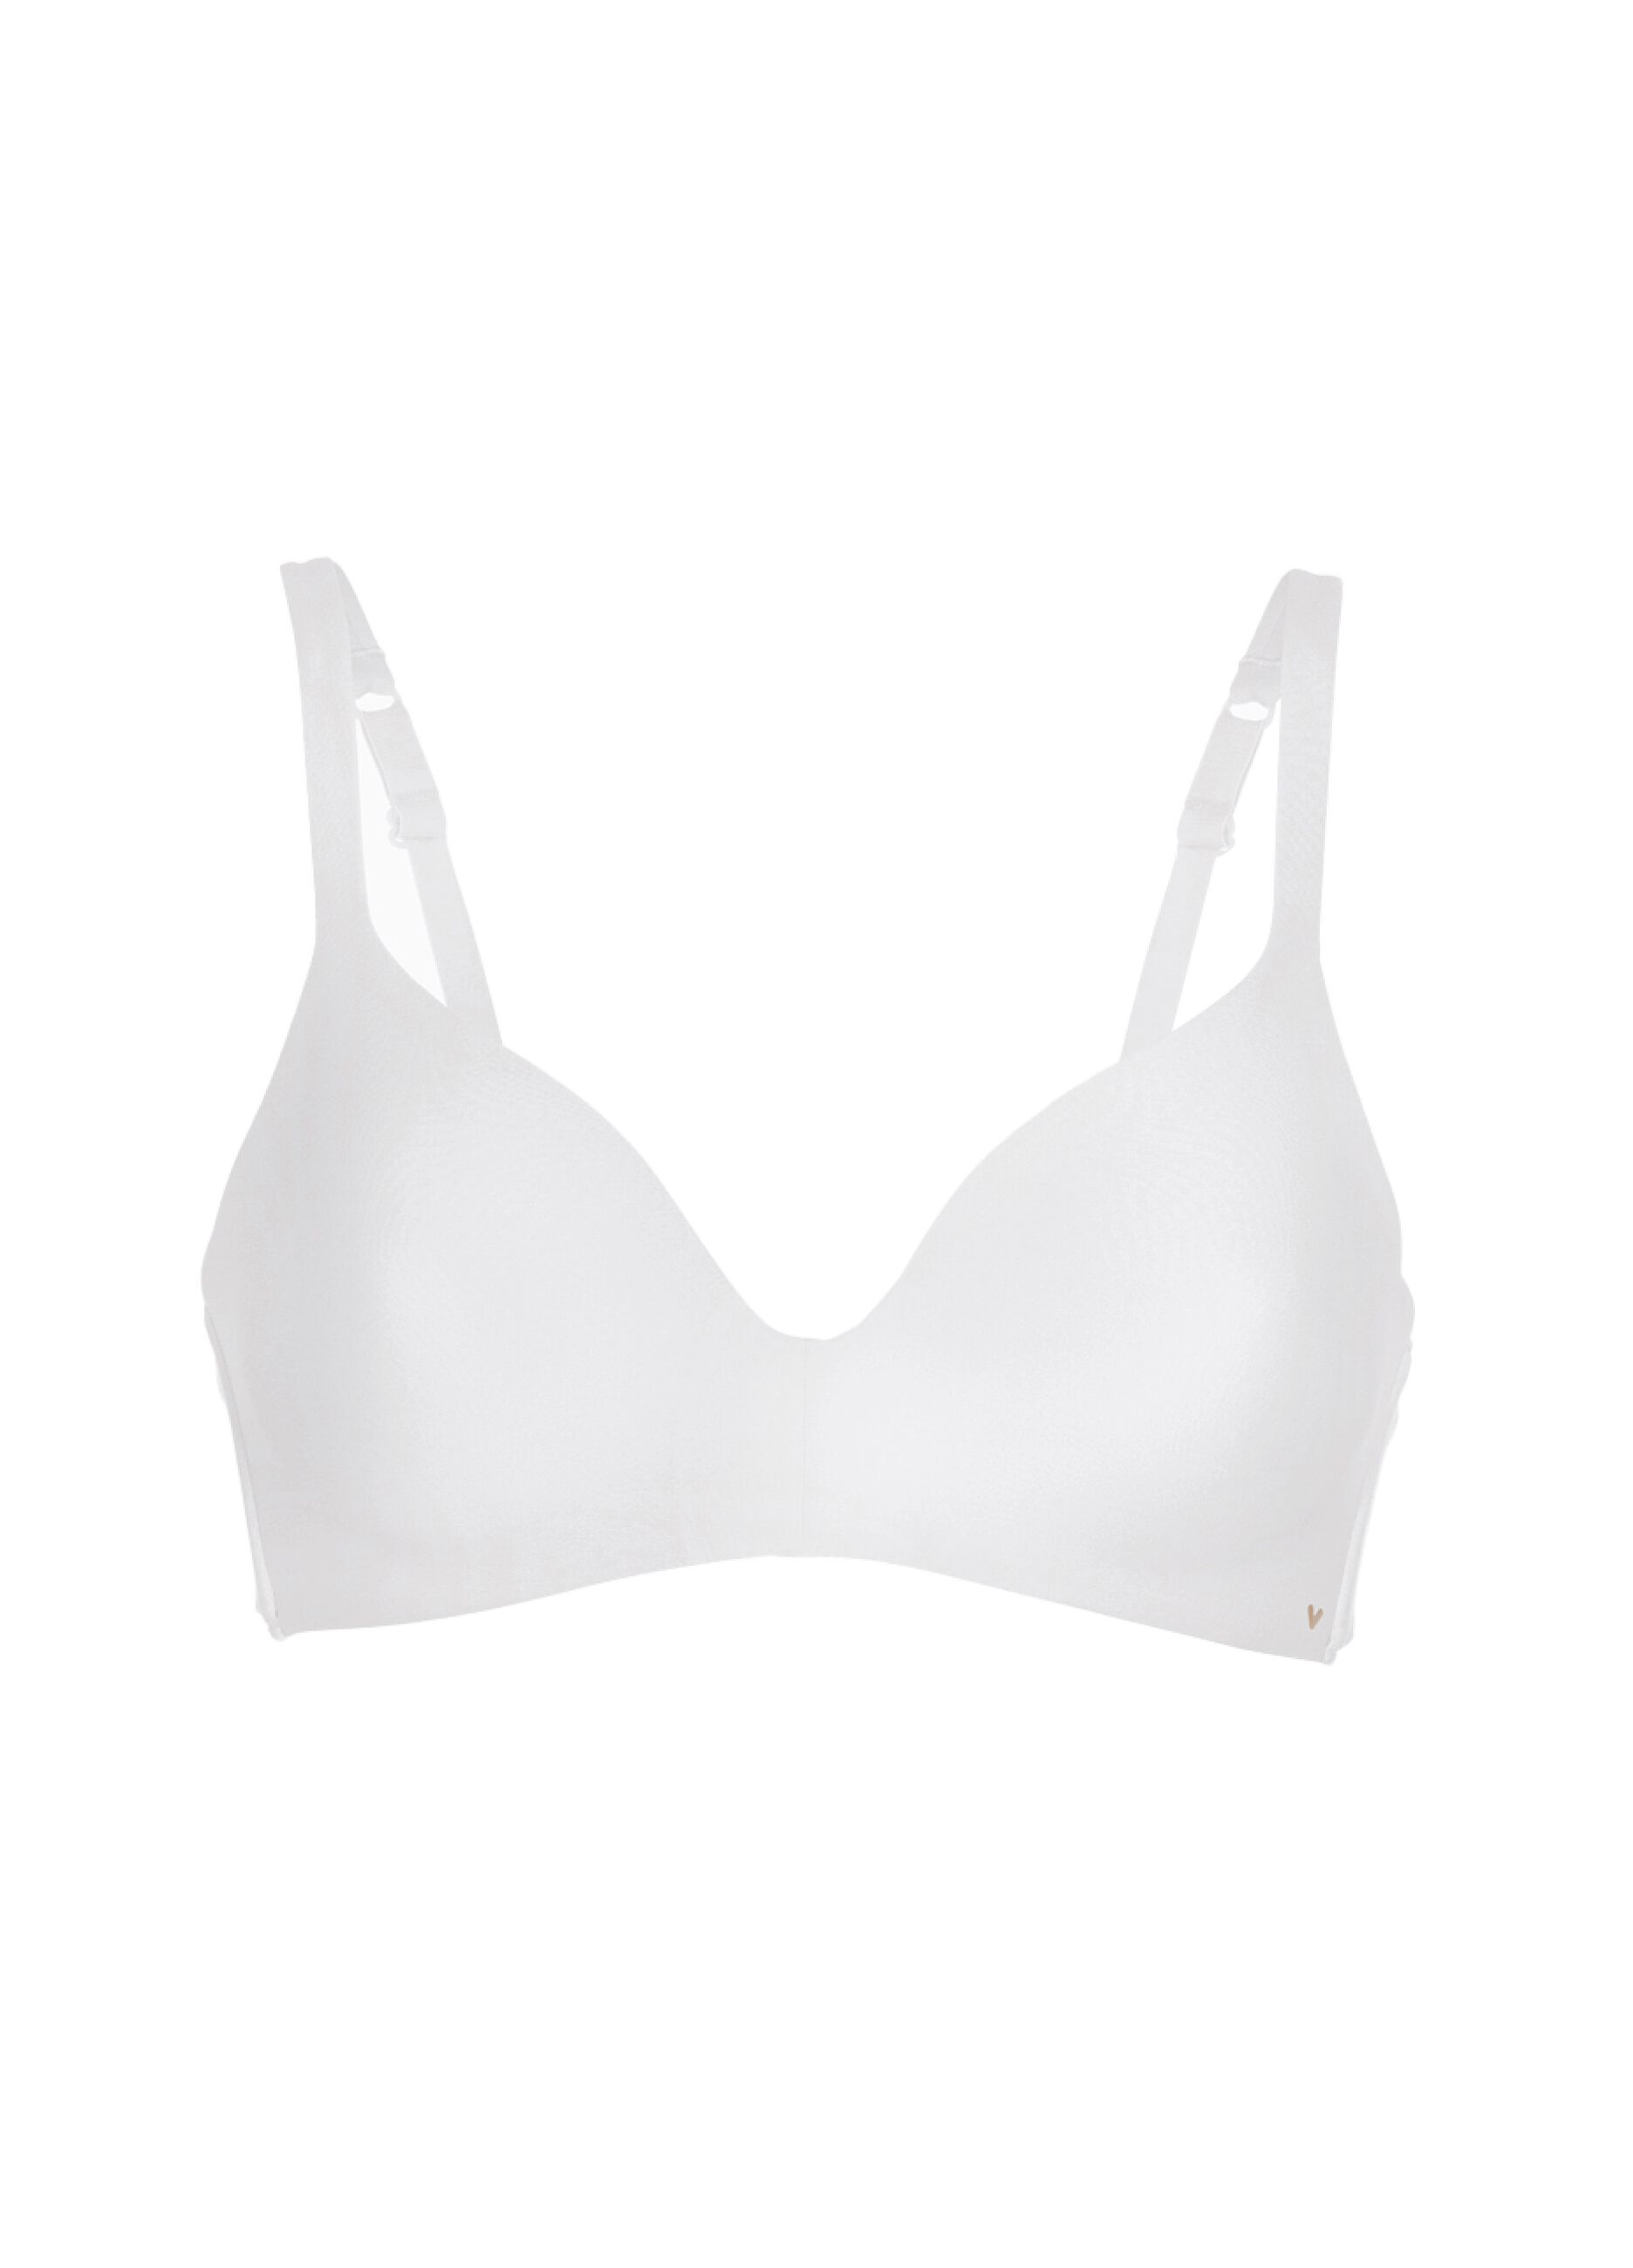 Invisible Lift bra without underwiring